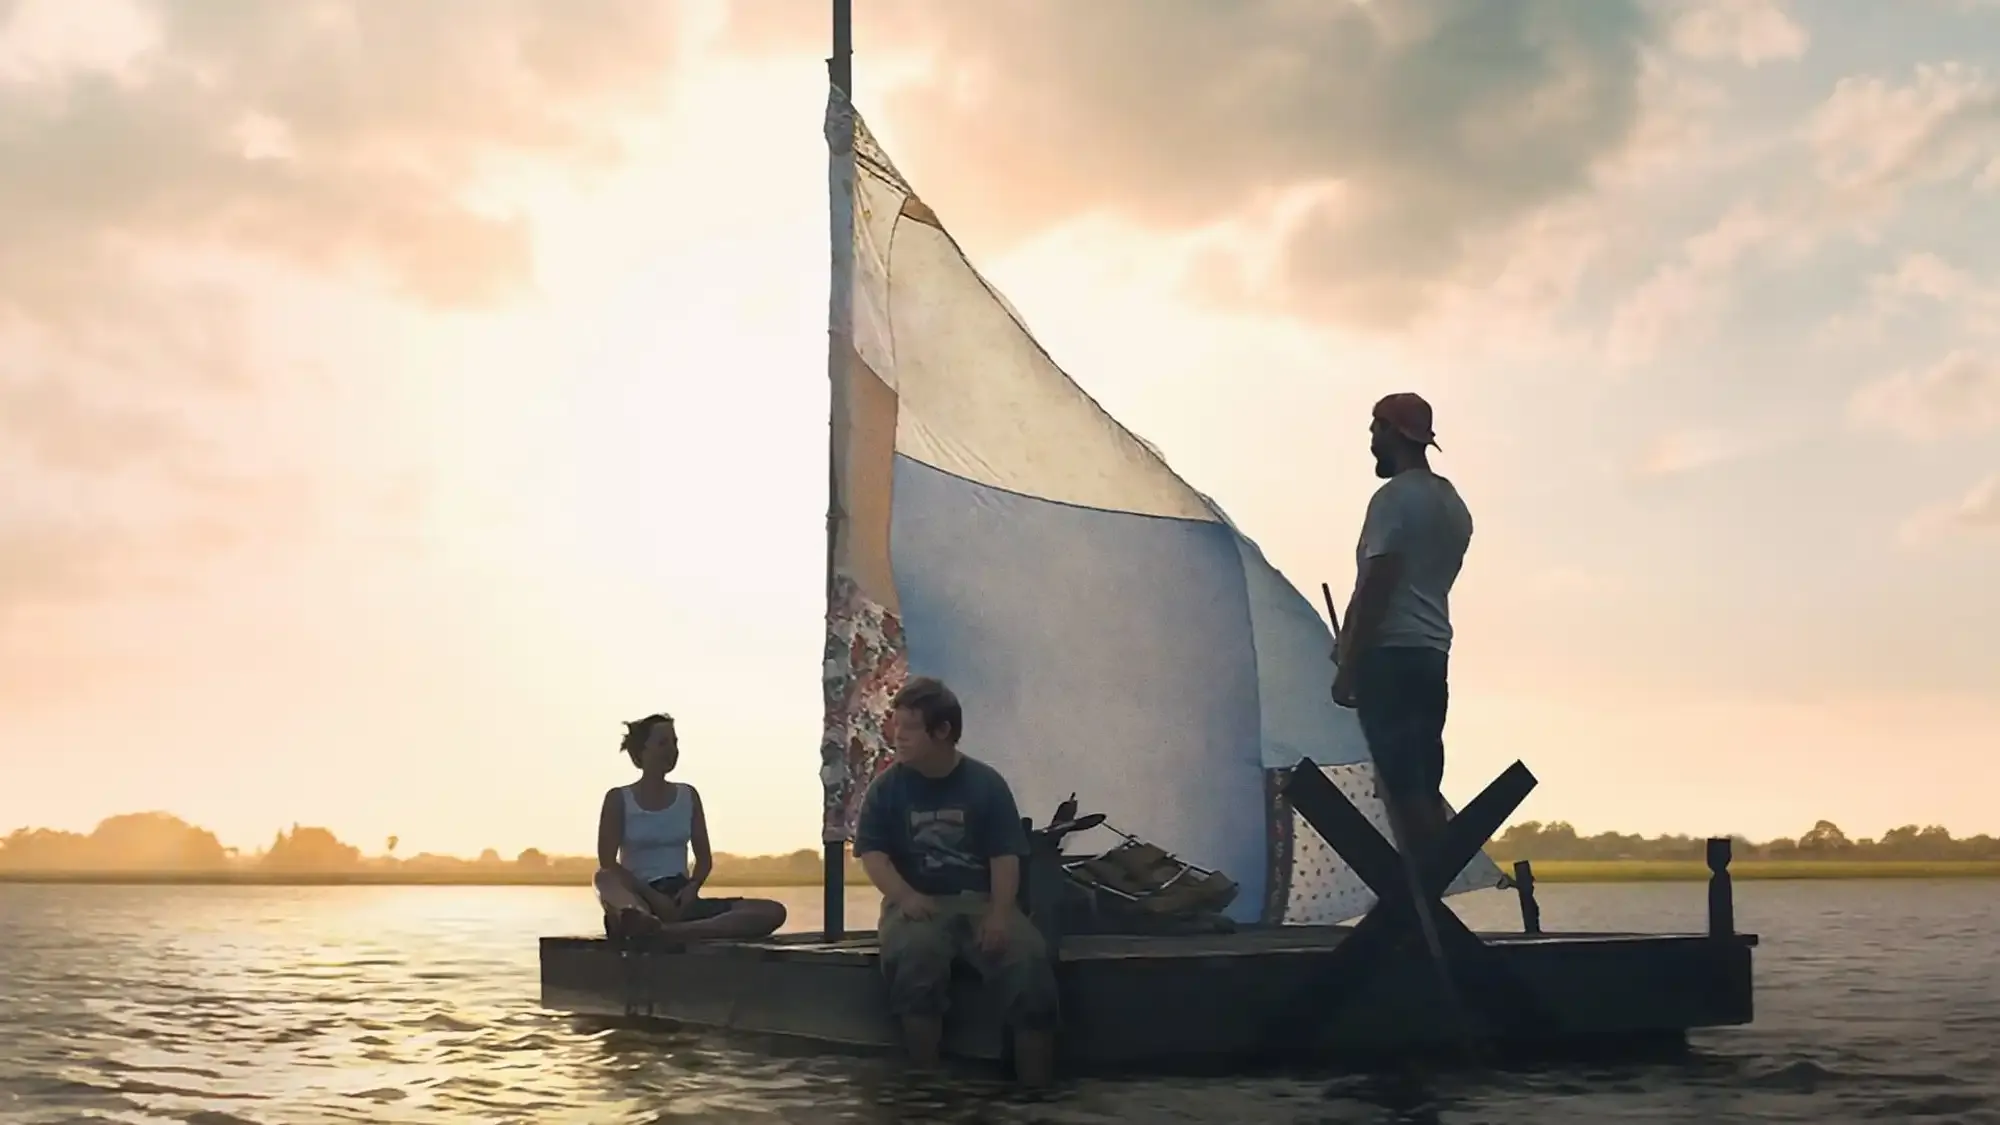 The Peanut Butter Falcon movie review